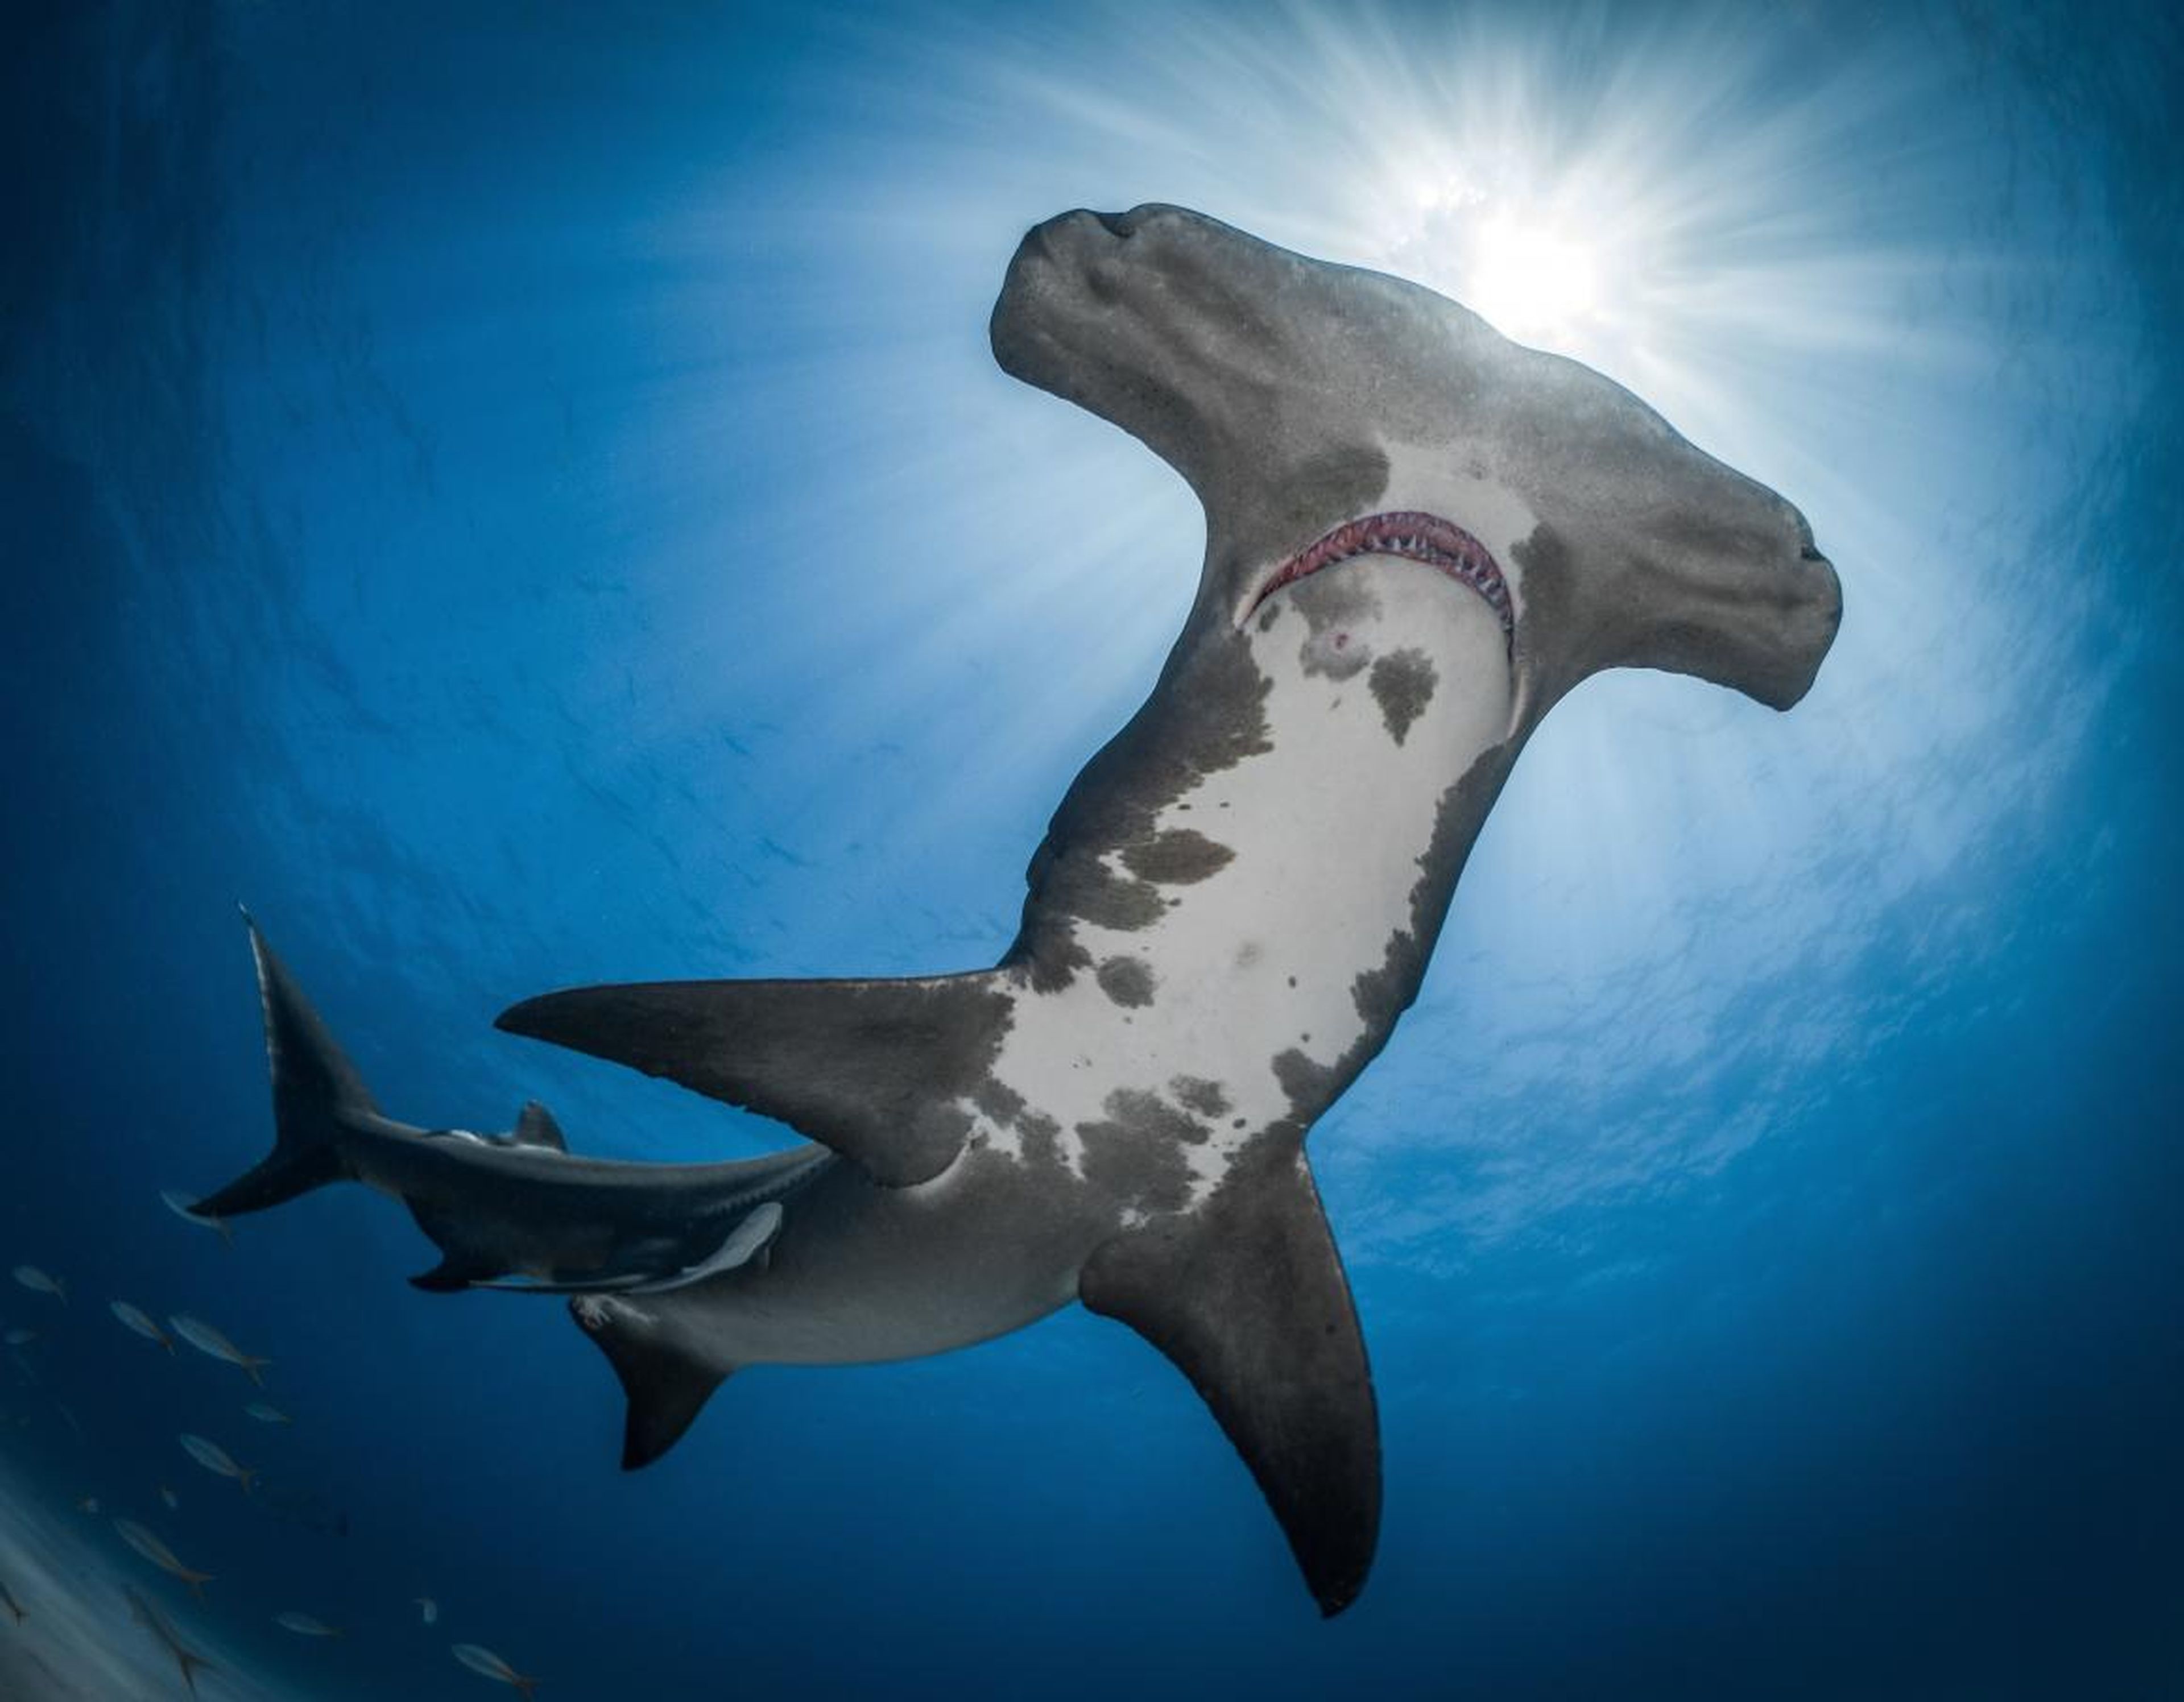 The silver medal for shark photography went to Debbie Wallace, who took this picture of a female great Atlantic hammerhead shark from below in the Bahamas.